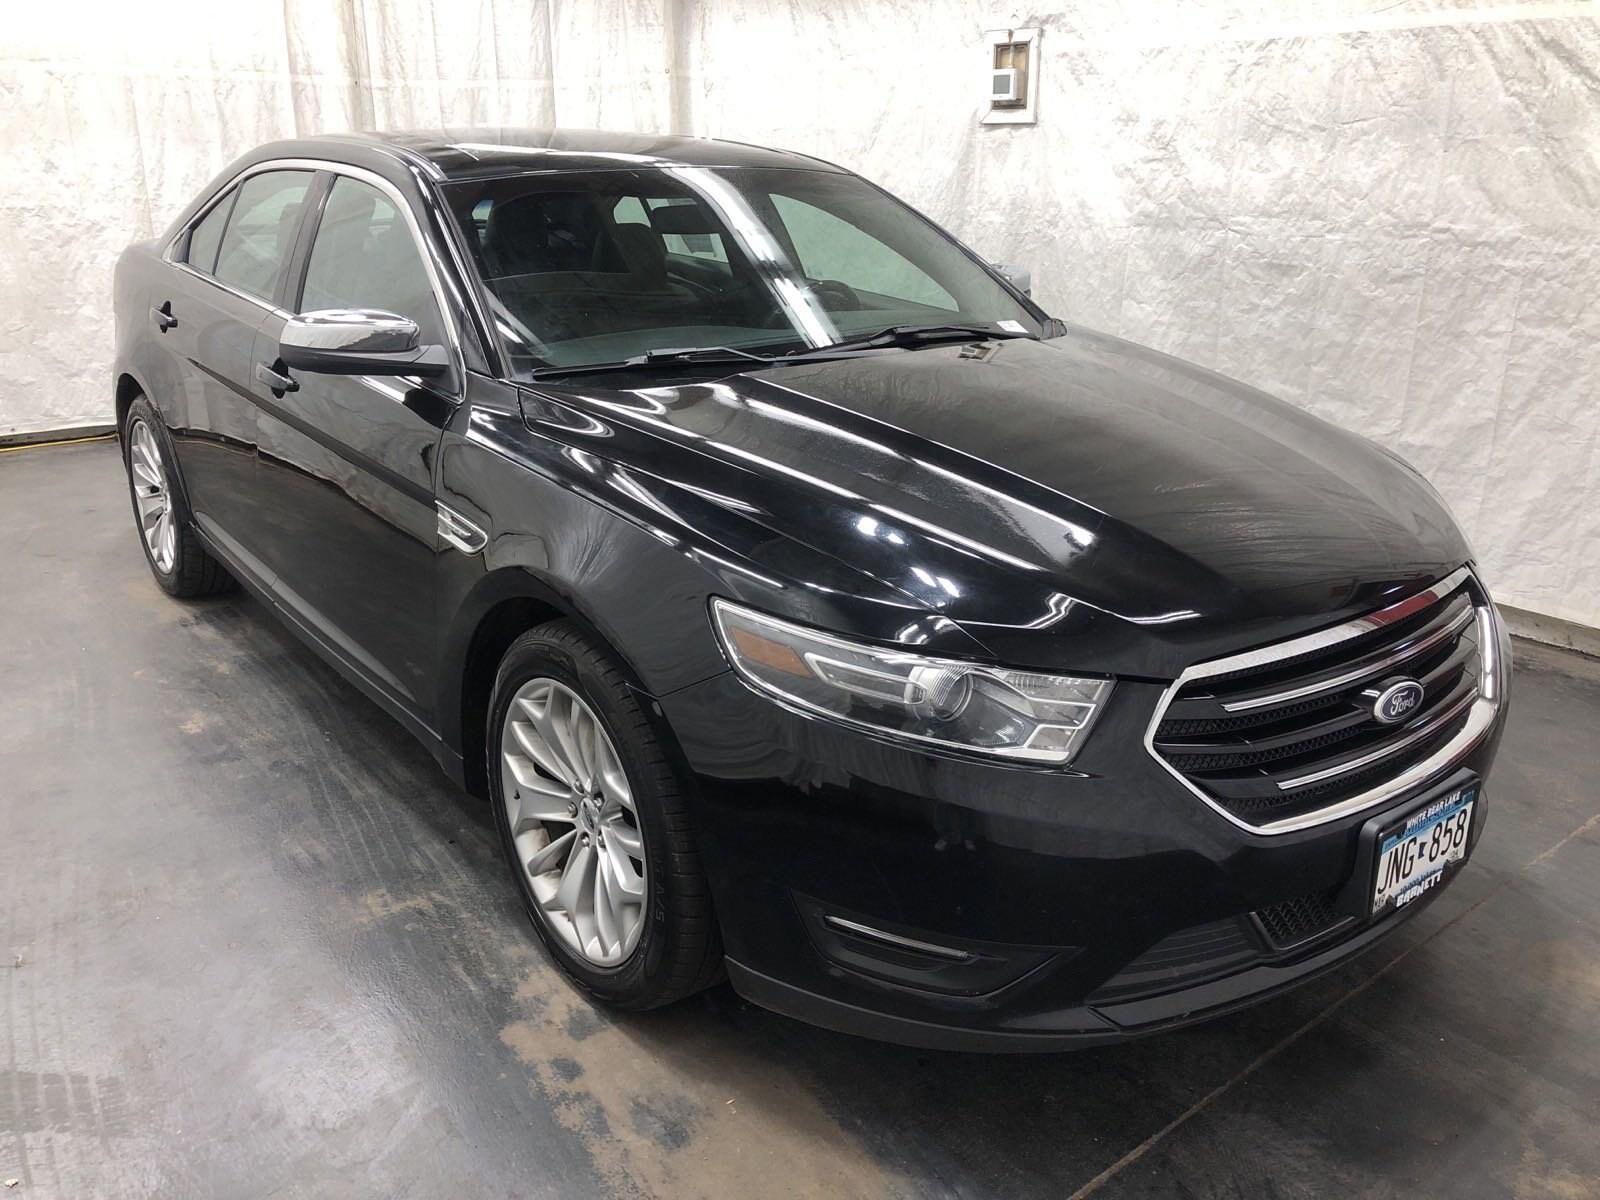 Used 2016 Ford Taurus Limited with VIN 1FAHP2J88GG107724 for sale in White Bear Lake, Minnesota